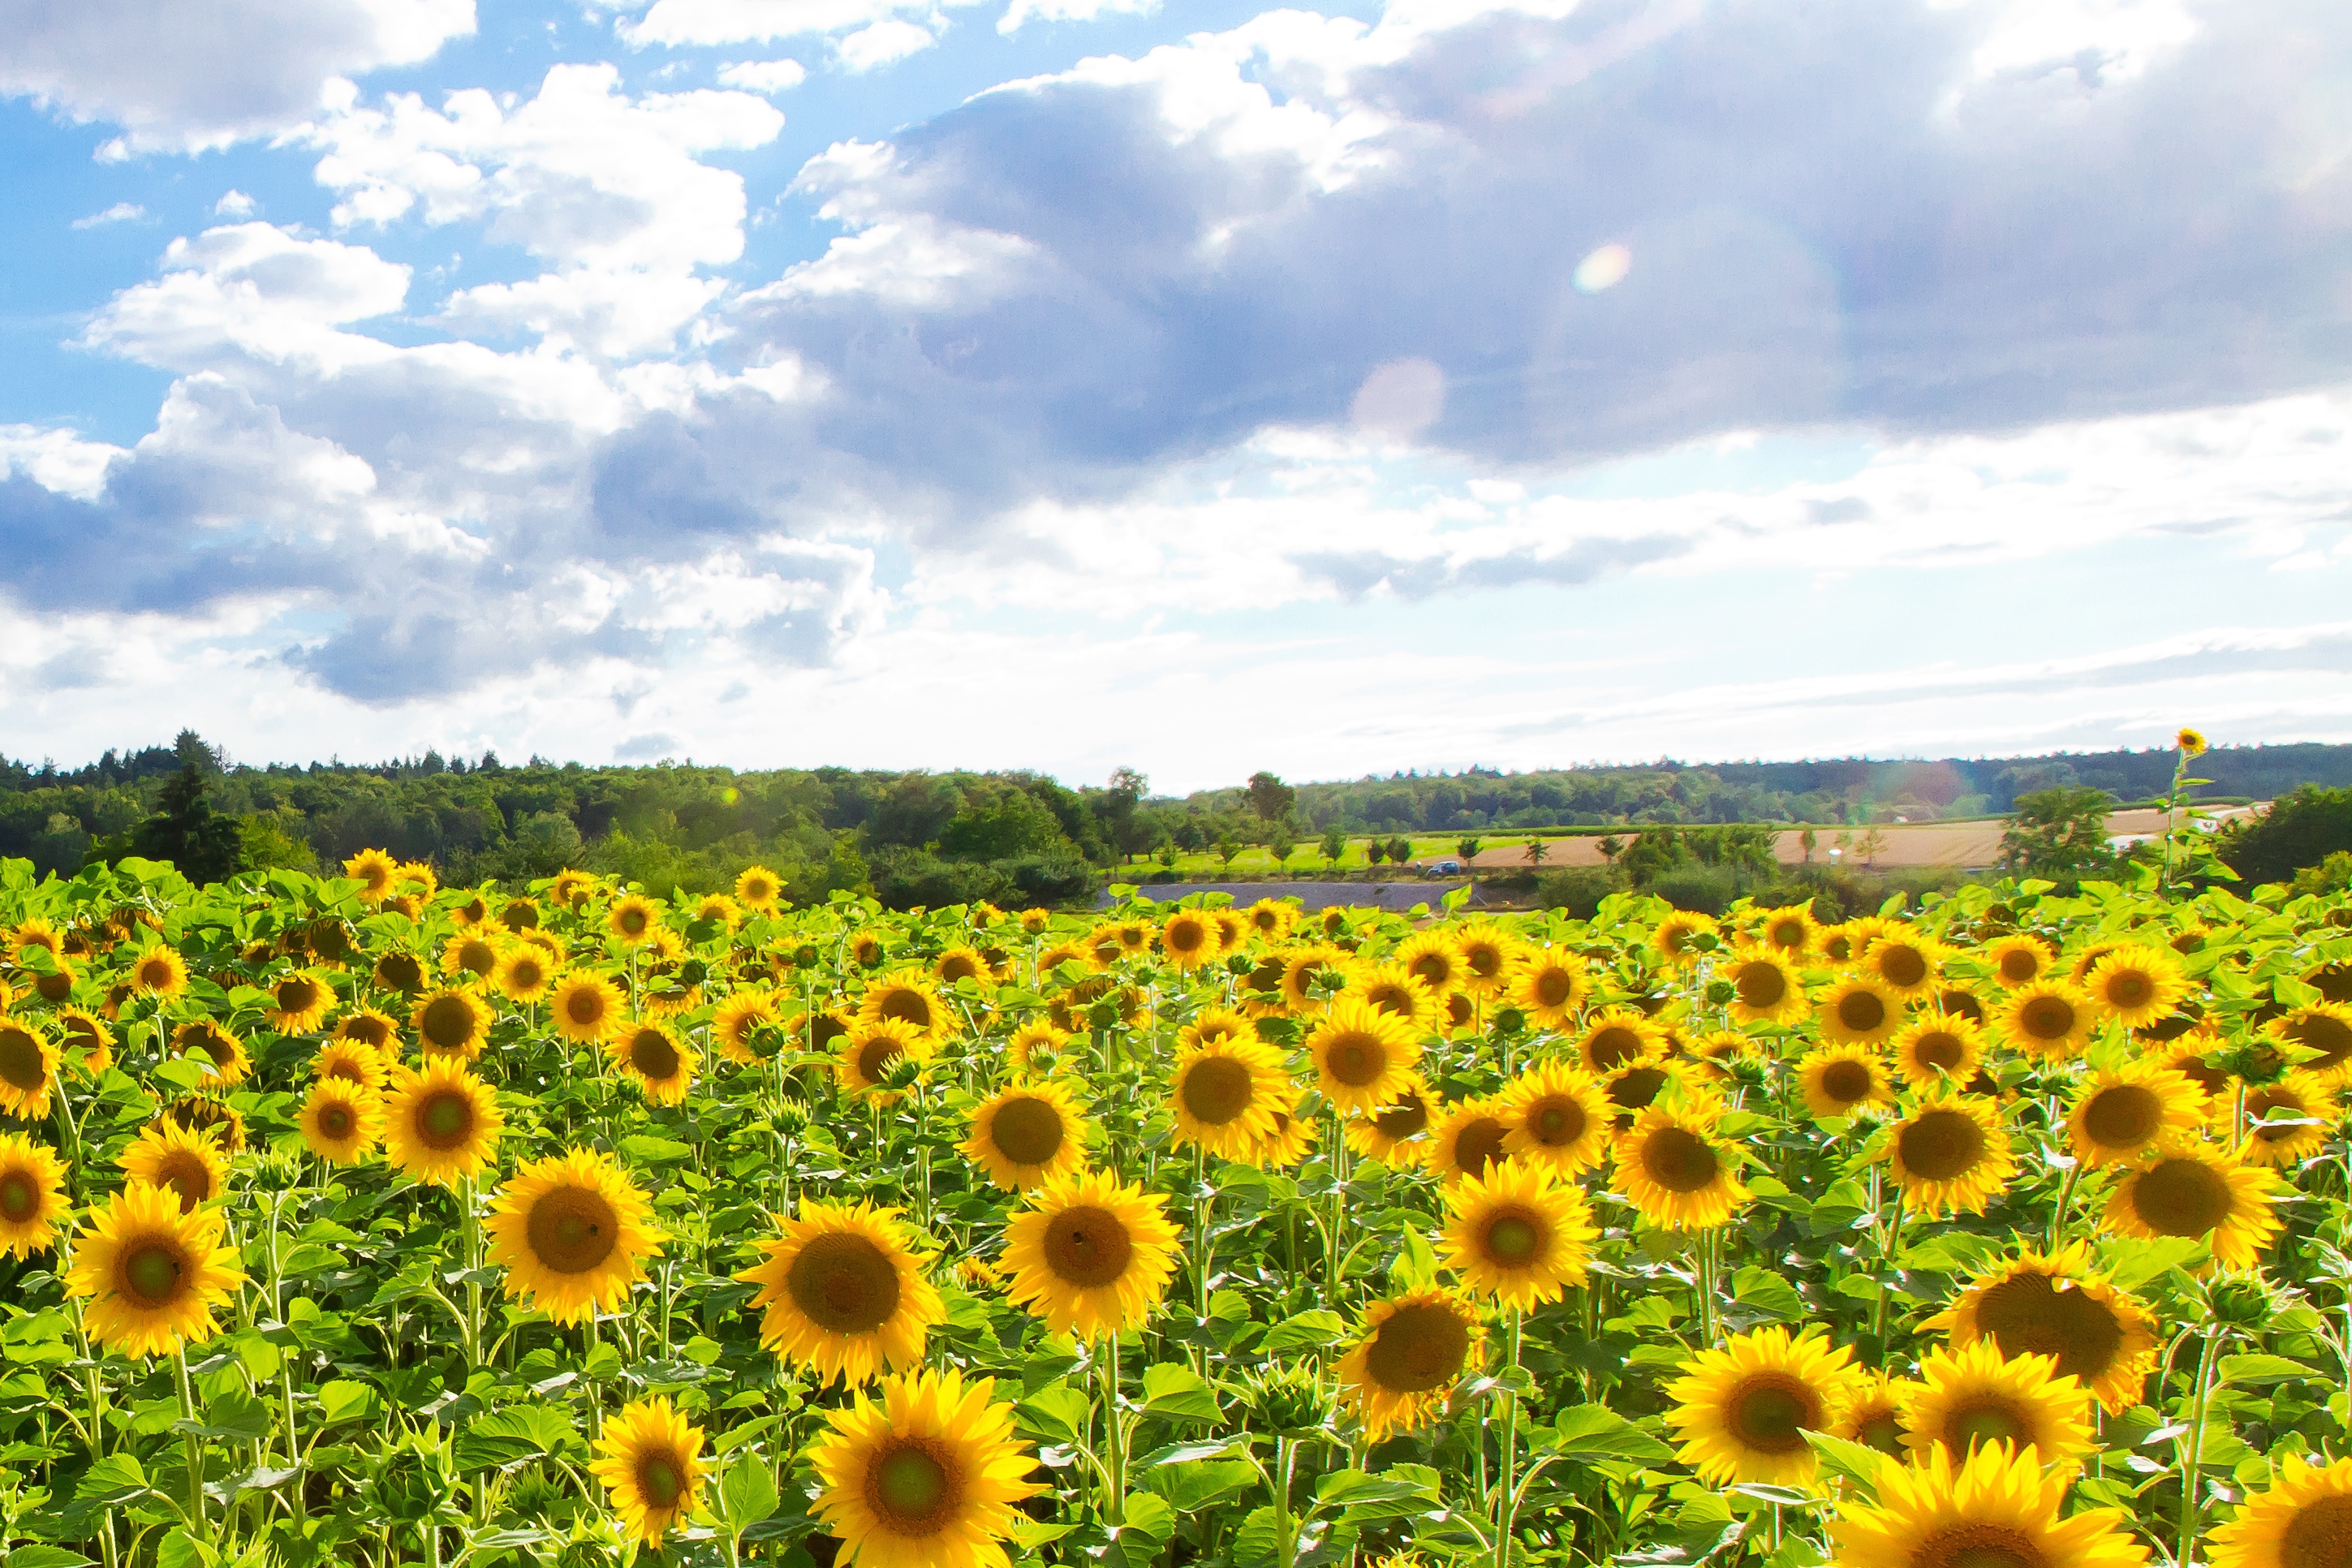 Field of sunflowers for the production of biodiesel, using potassium hydroxide solid